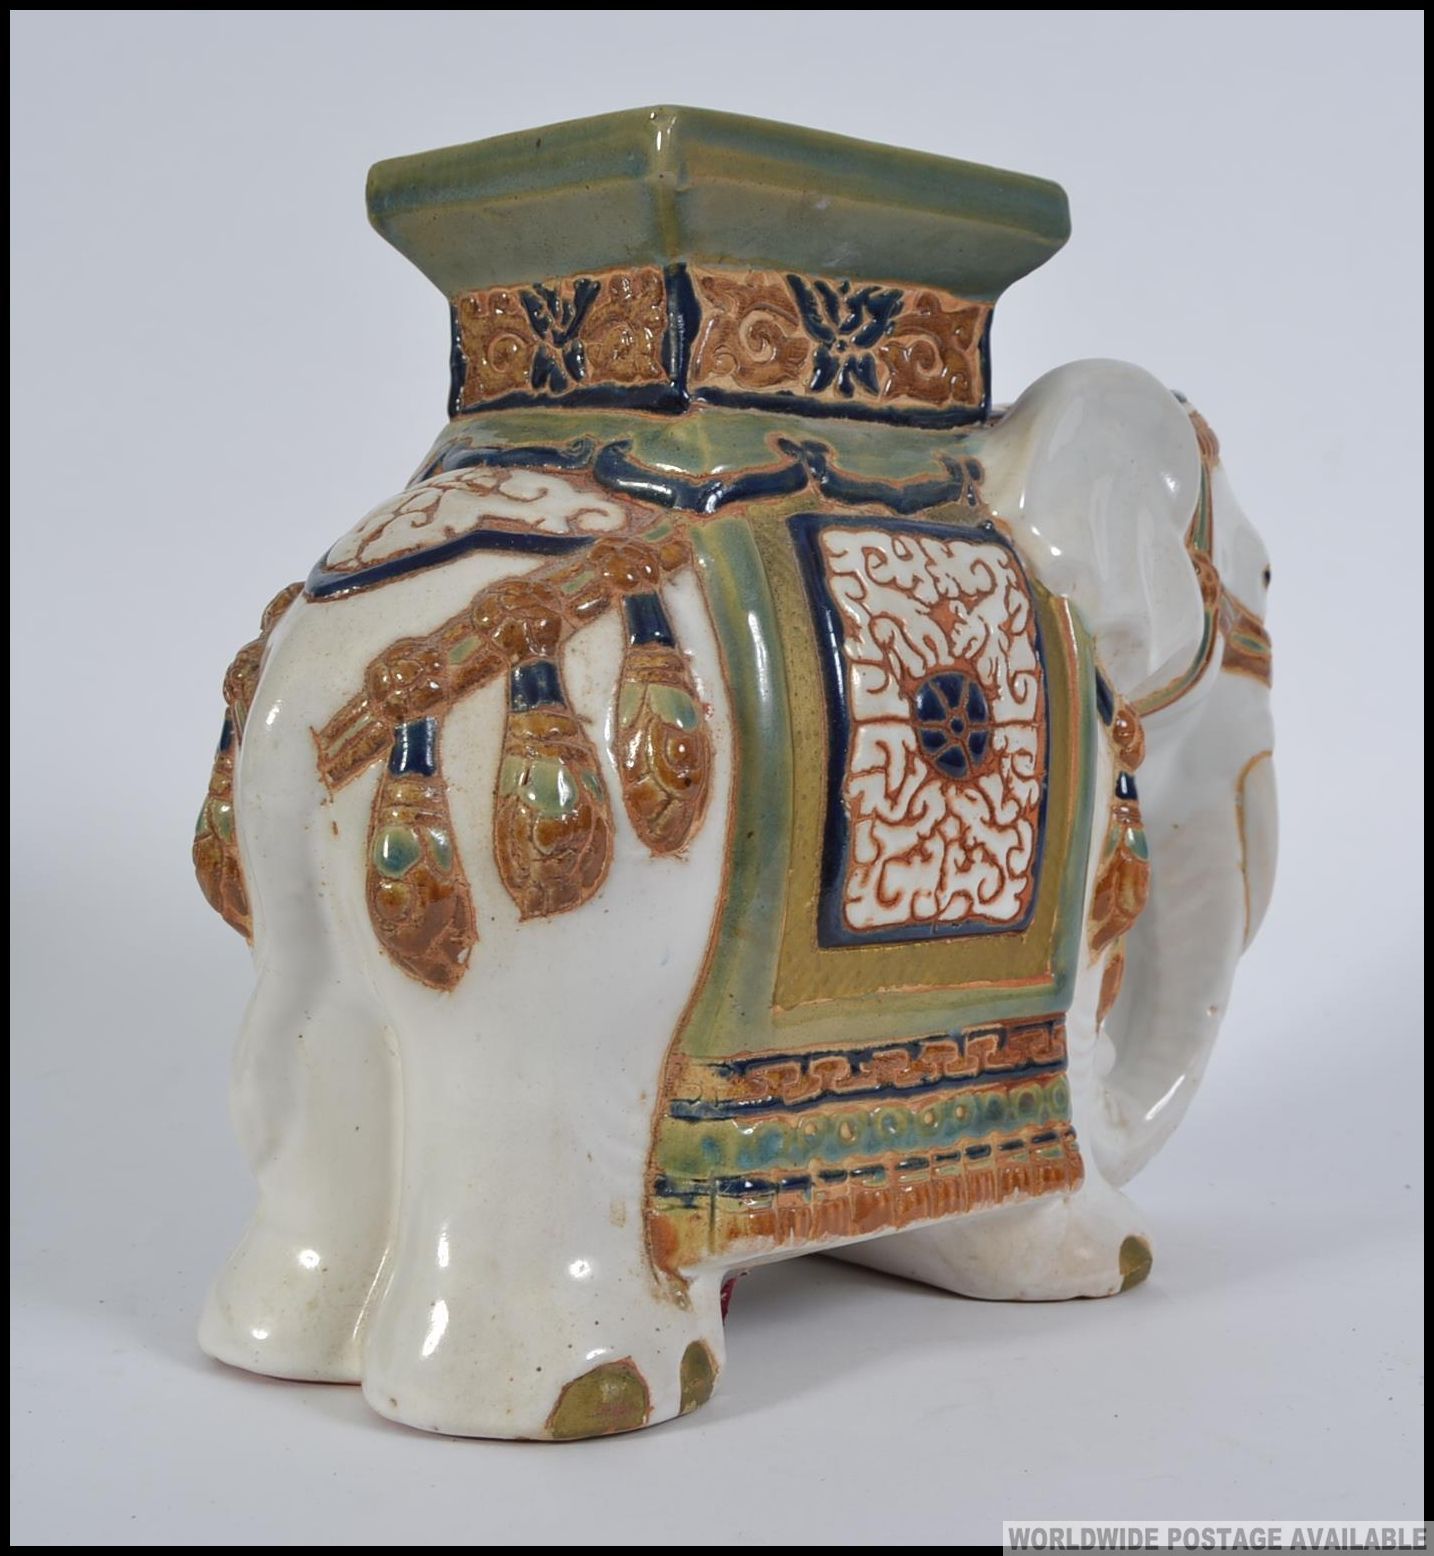 A 20th century large Chinese ceramic planter / stool in the form of an Elephant. Measures: 27cm H. - Image 2 of 4